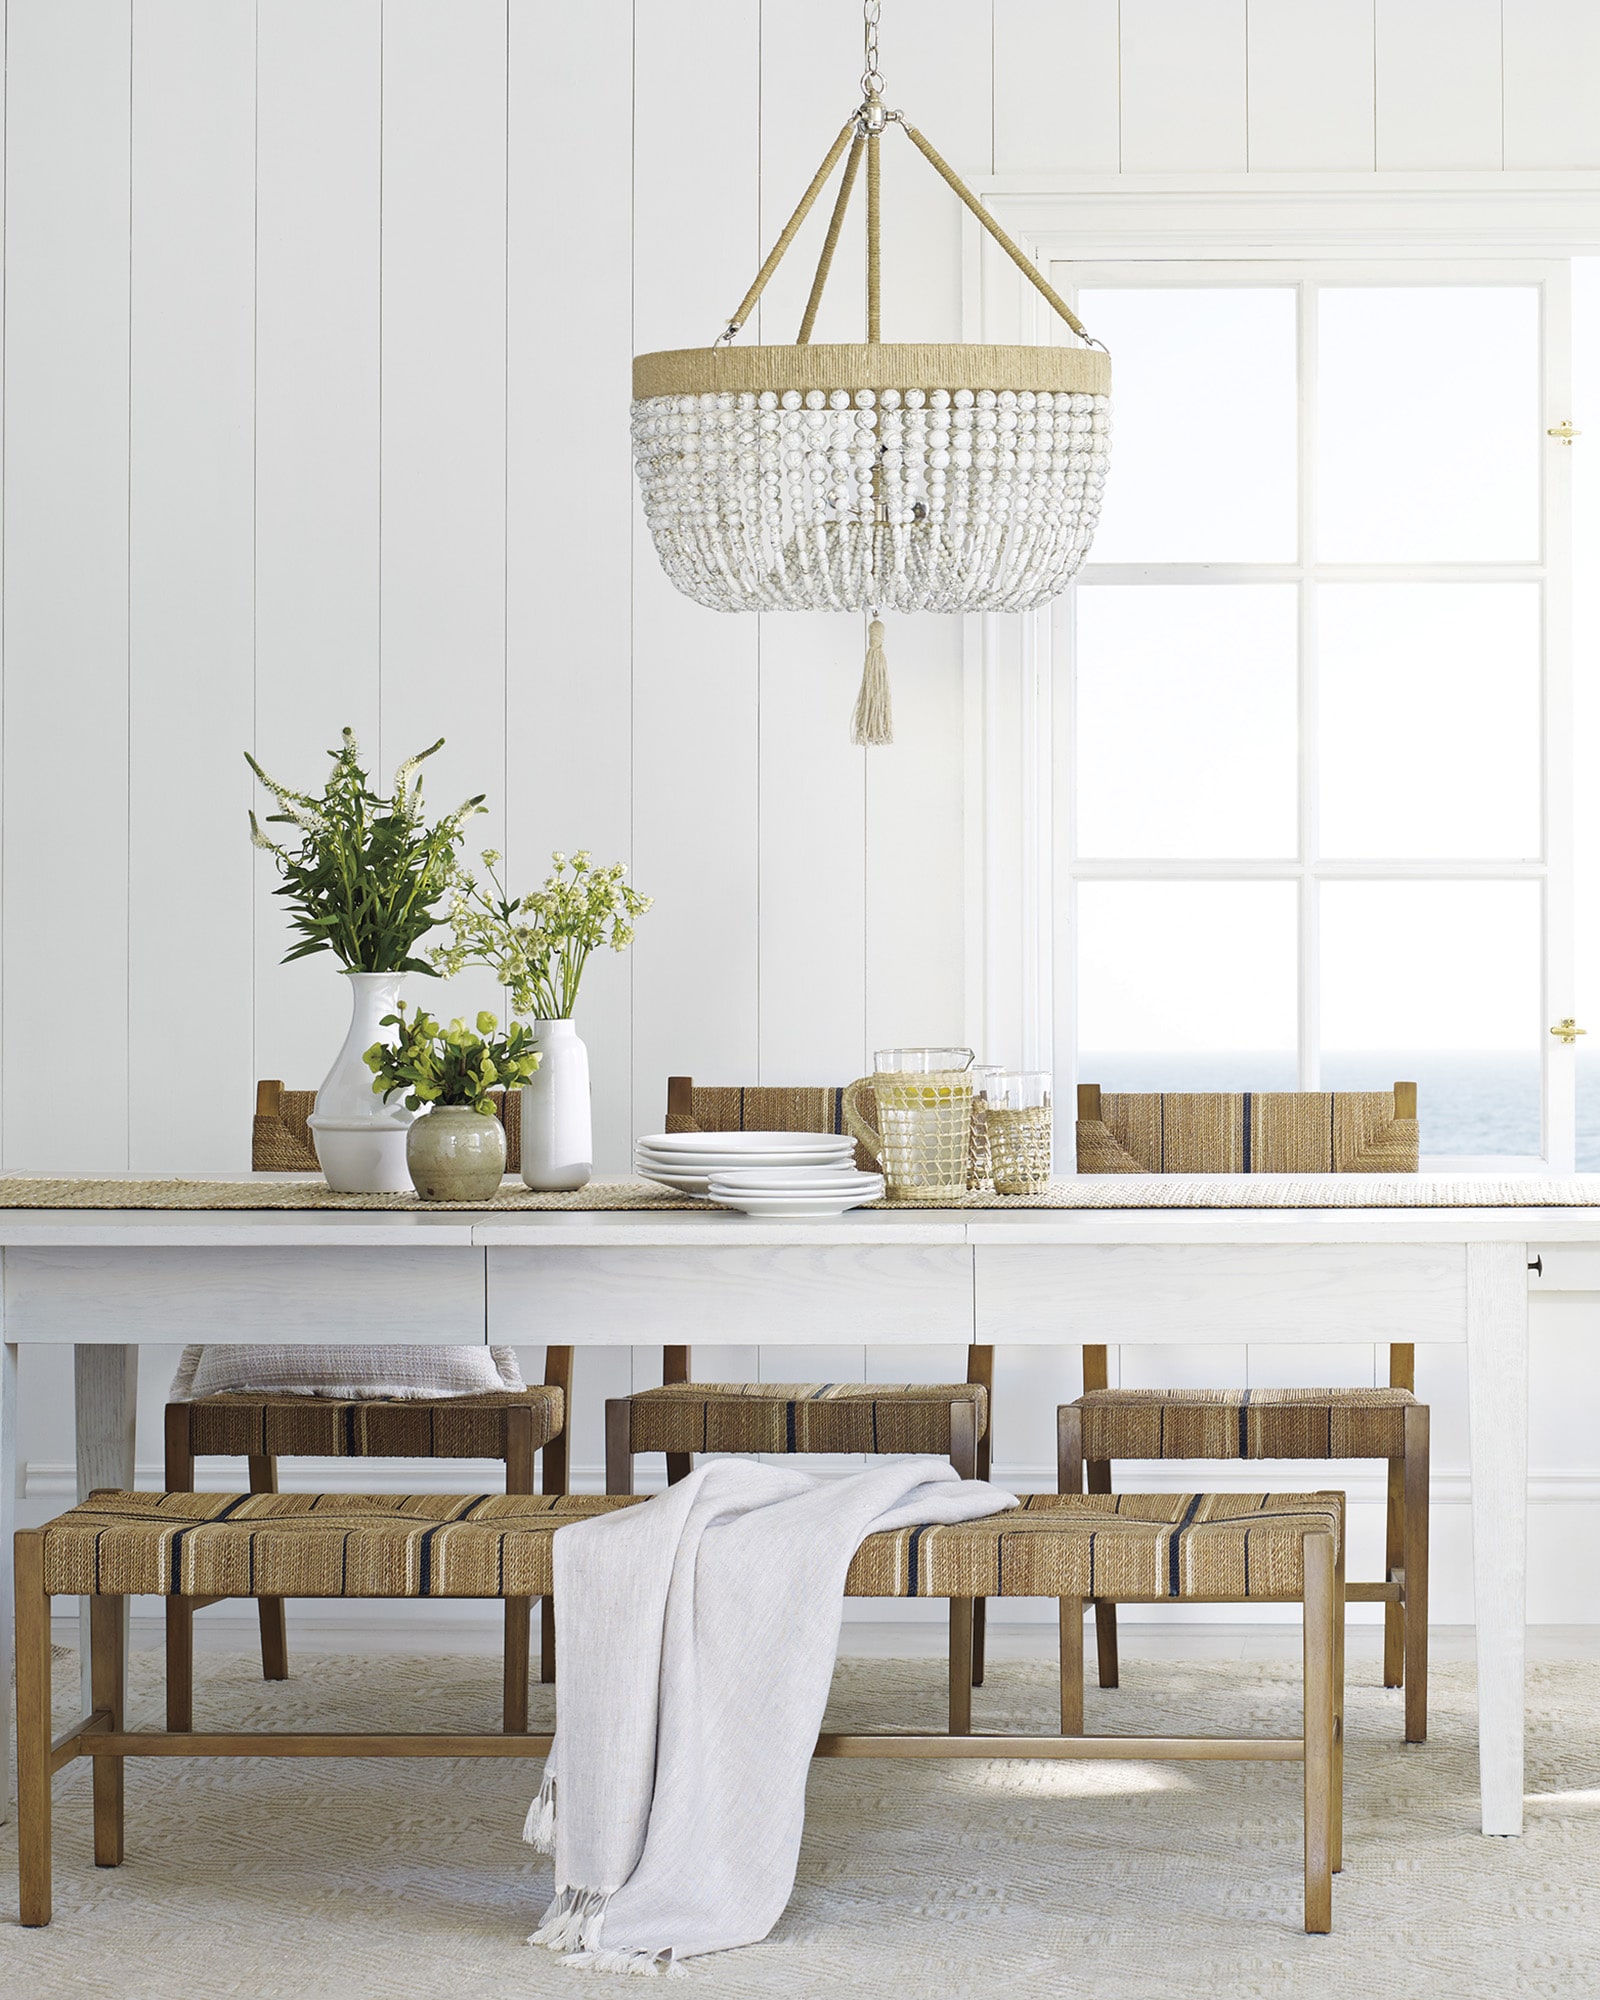 entertaining dining table and chairs from Serena & Lily